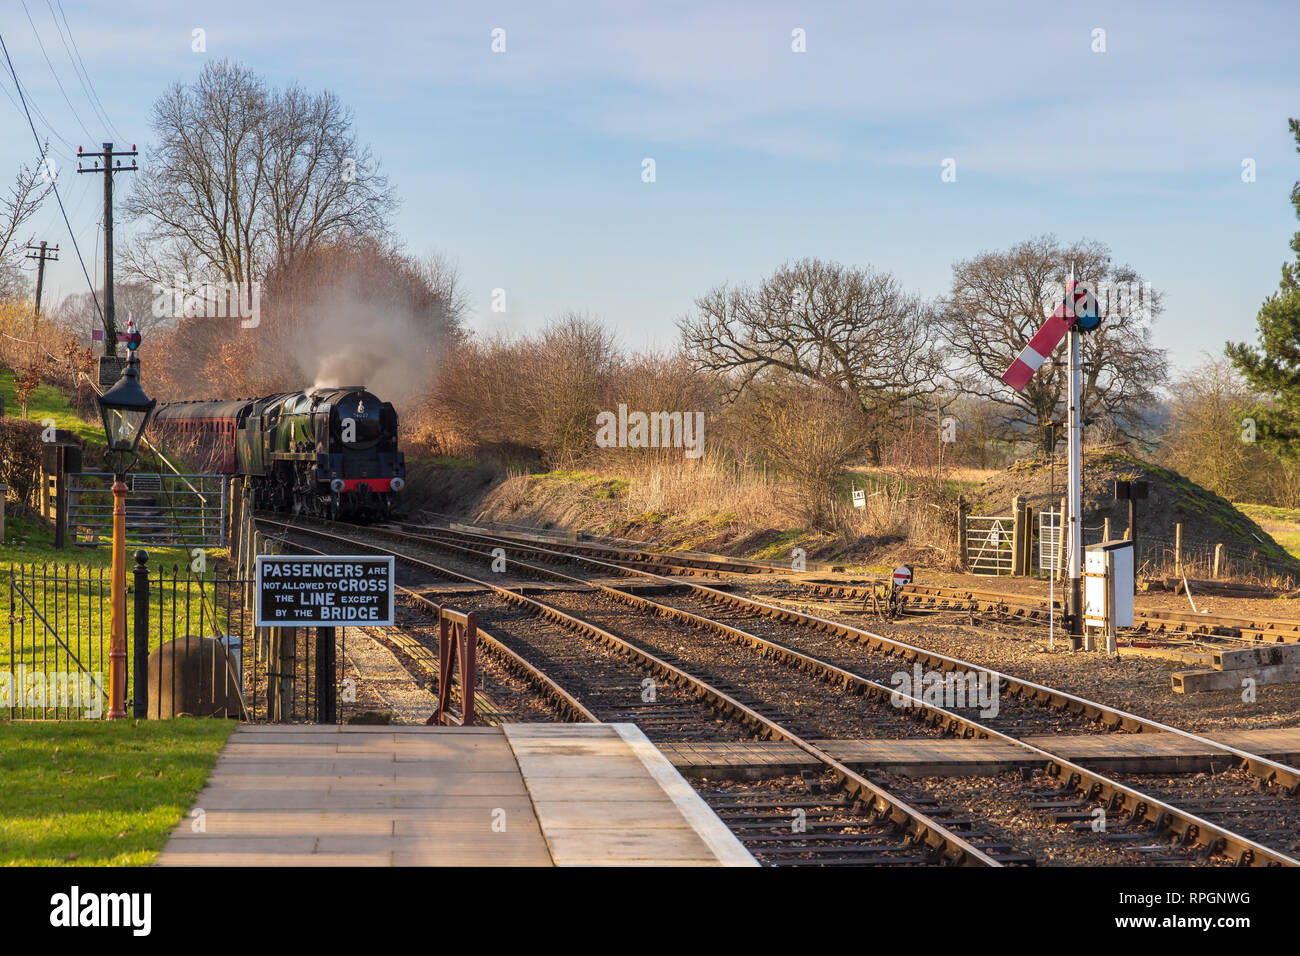 Steam trains on the Severn Valley Railway in the picturesque village of Arley in Worcestershire, UK.  Taken on February 21st 2019 Stock Photo